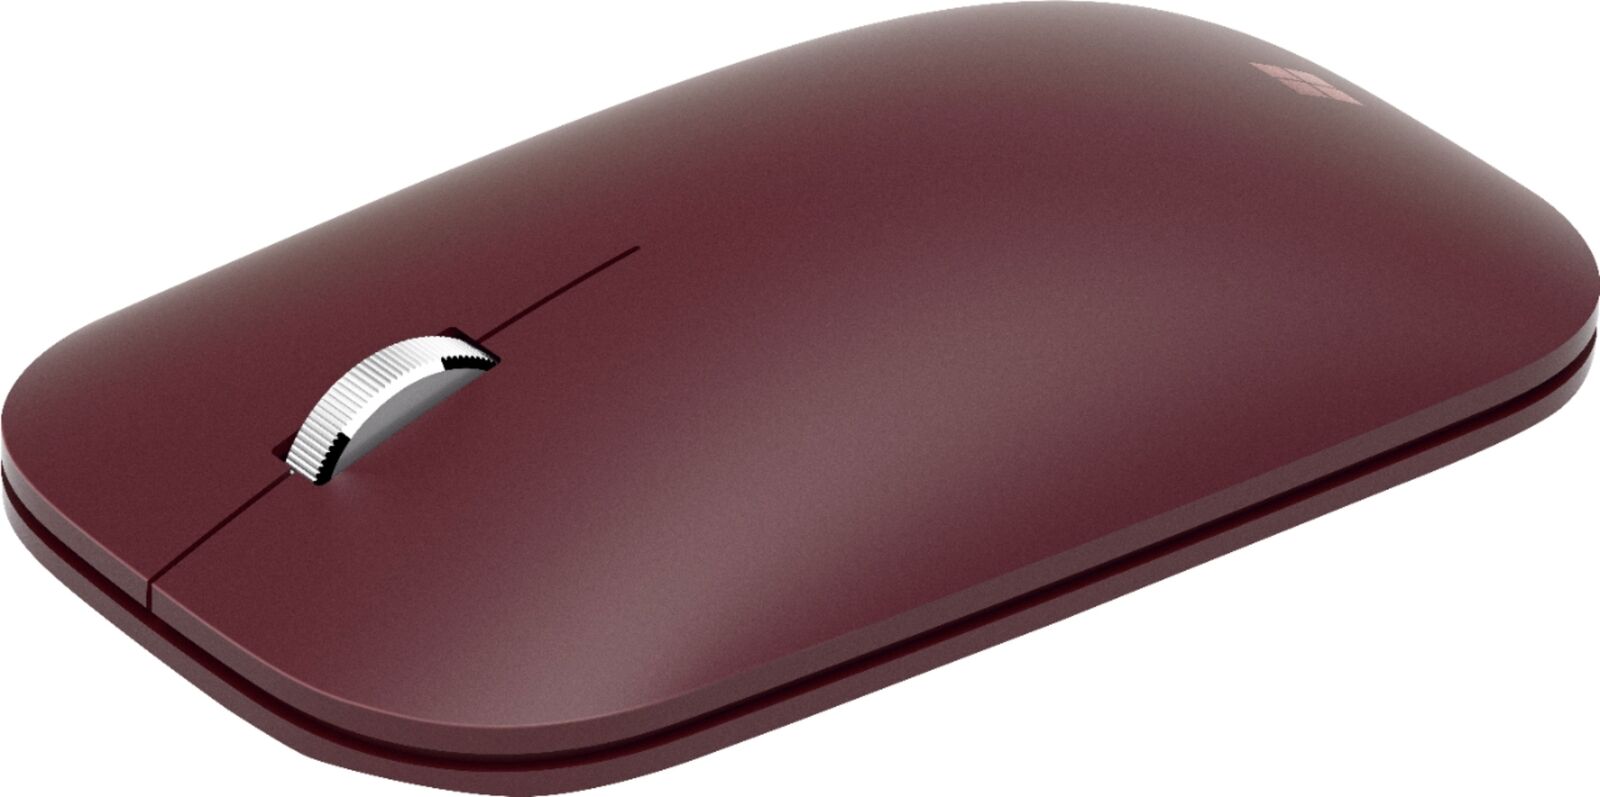 Microsoft Surface Mobile Mouse Burgundy (Canadian KGZ-00011) New